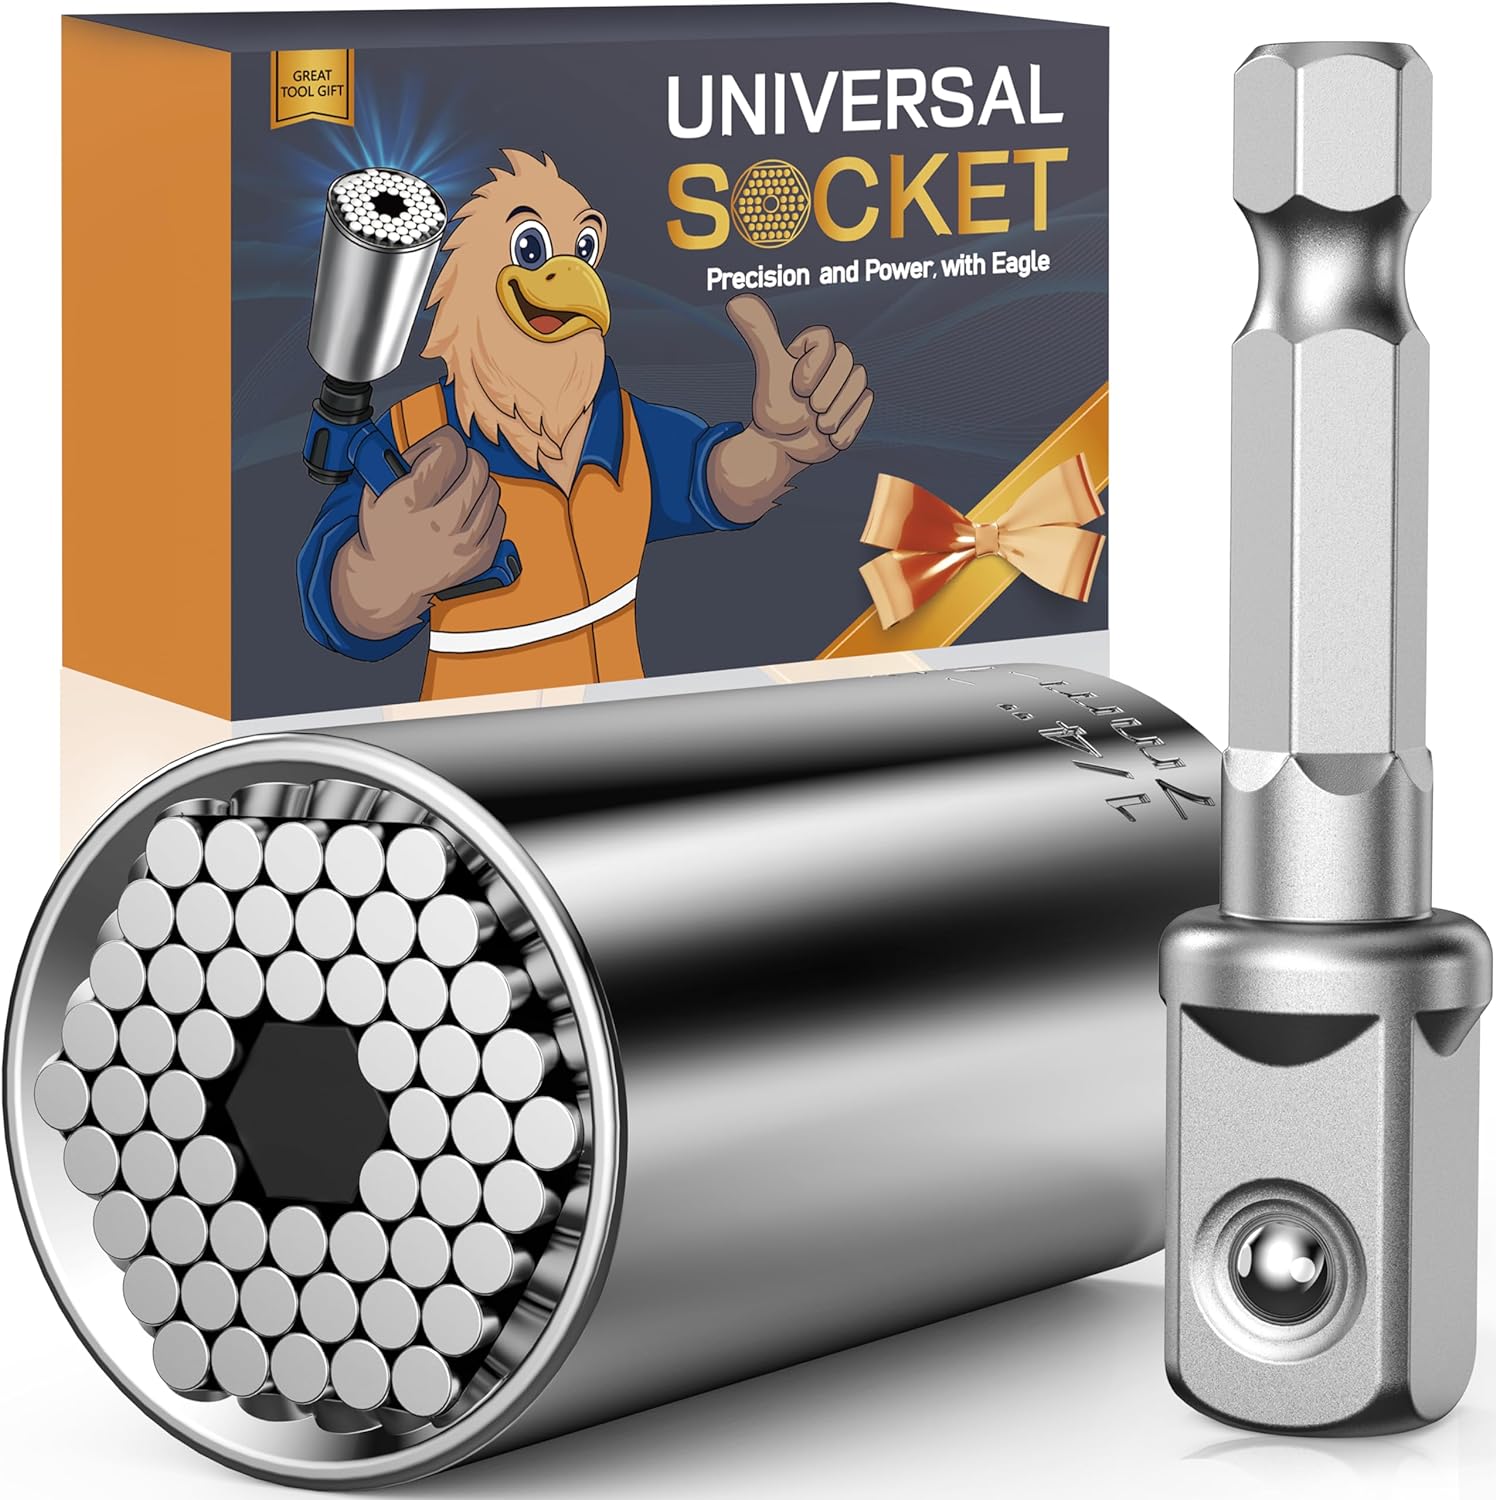 Universal Socket Tool Stocking Stuffers for Men 7-19mm Socket Wrench Set with Power Drill Adapter